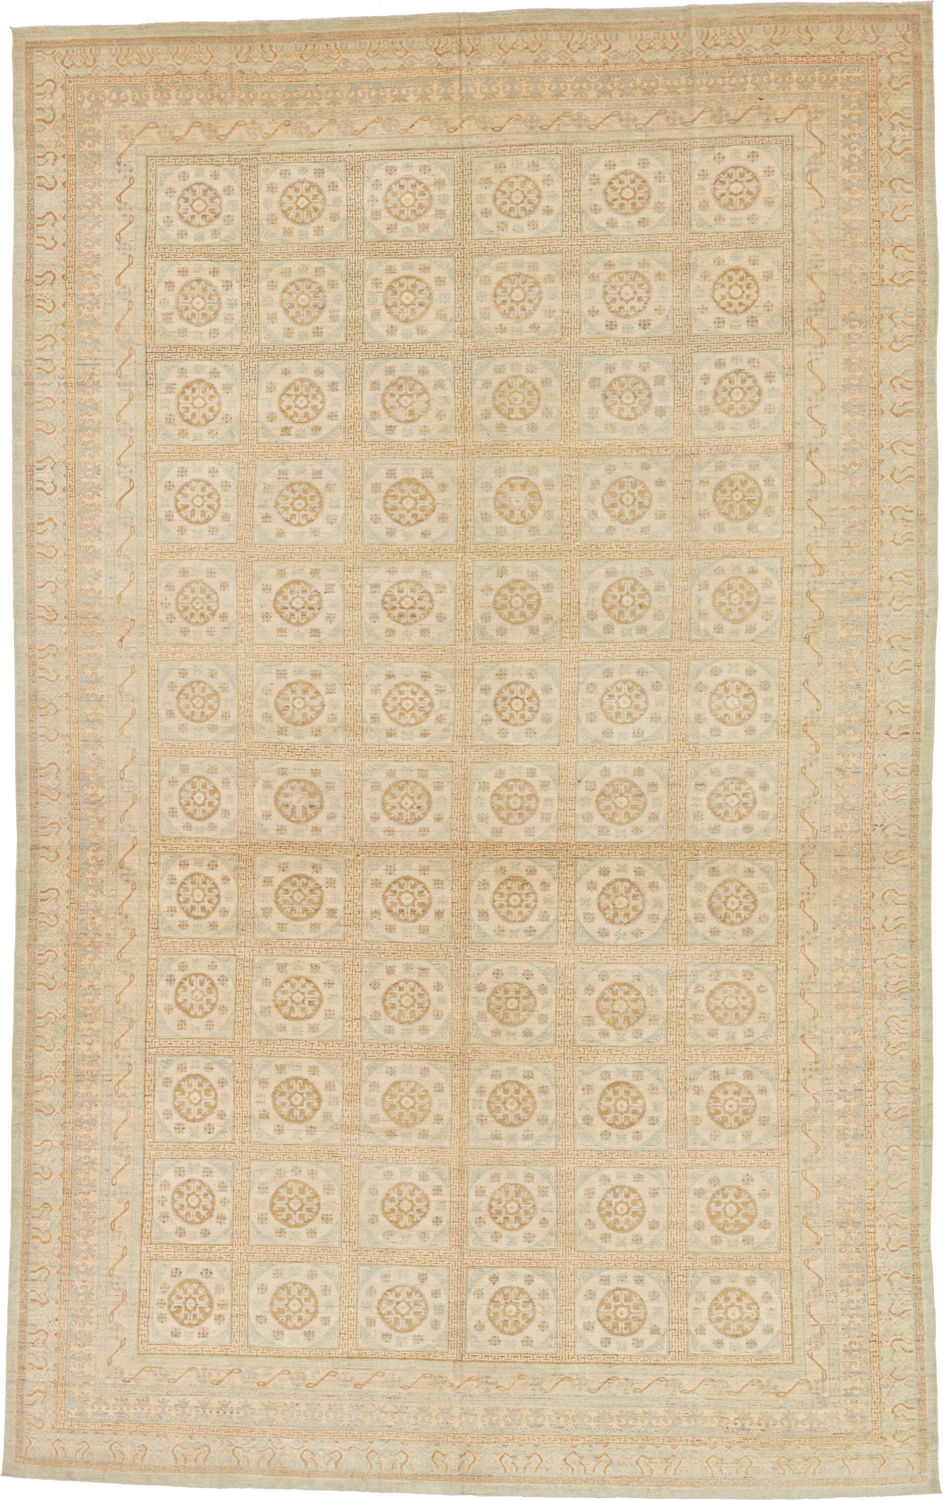 Silo of rectangular handmade cream-colored rug recommended by Sherrell Neal